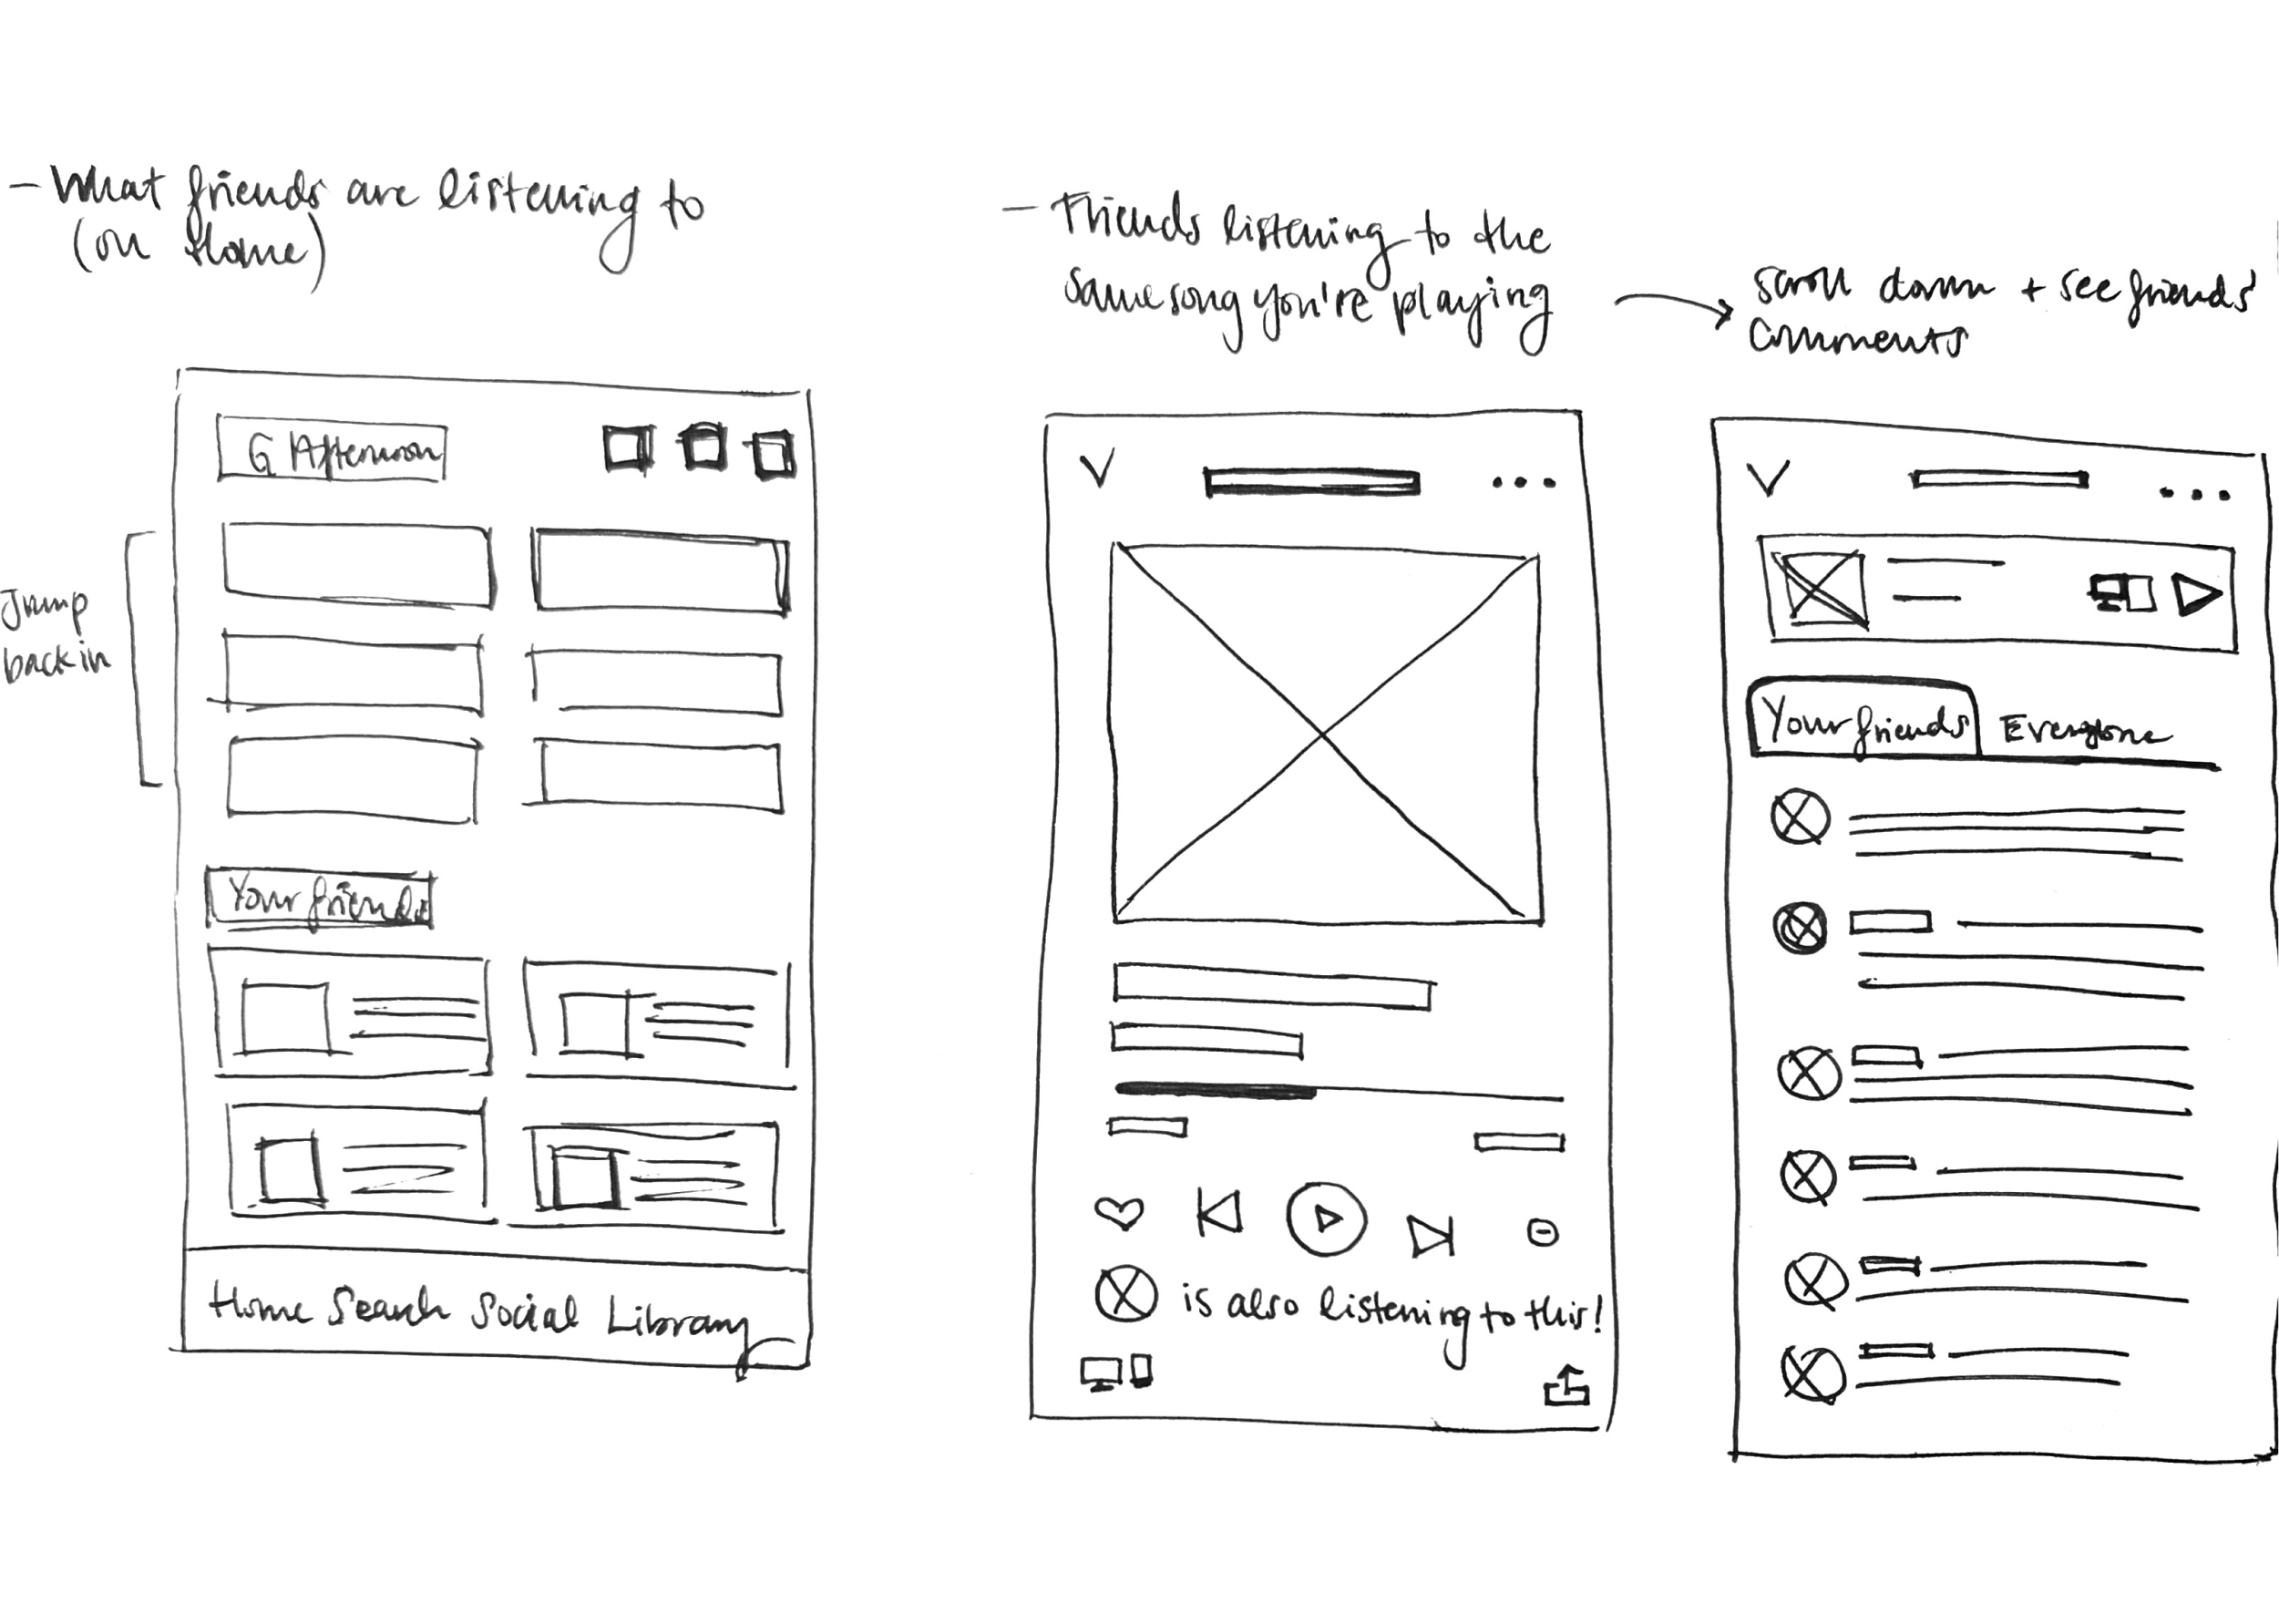 Wireframes of friends' comments and listening activity on a song